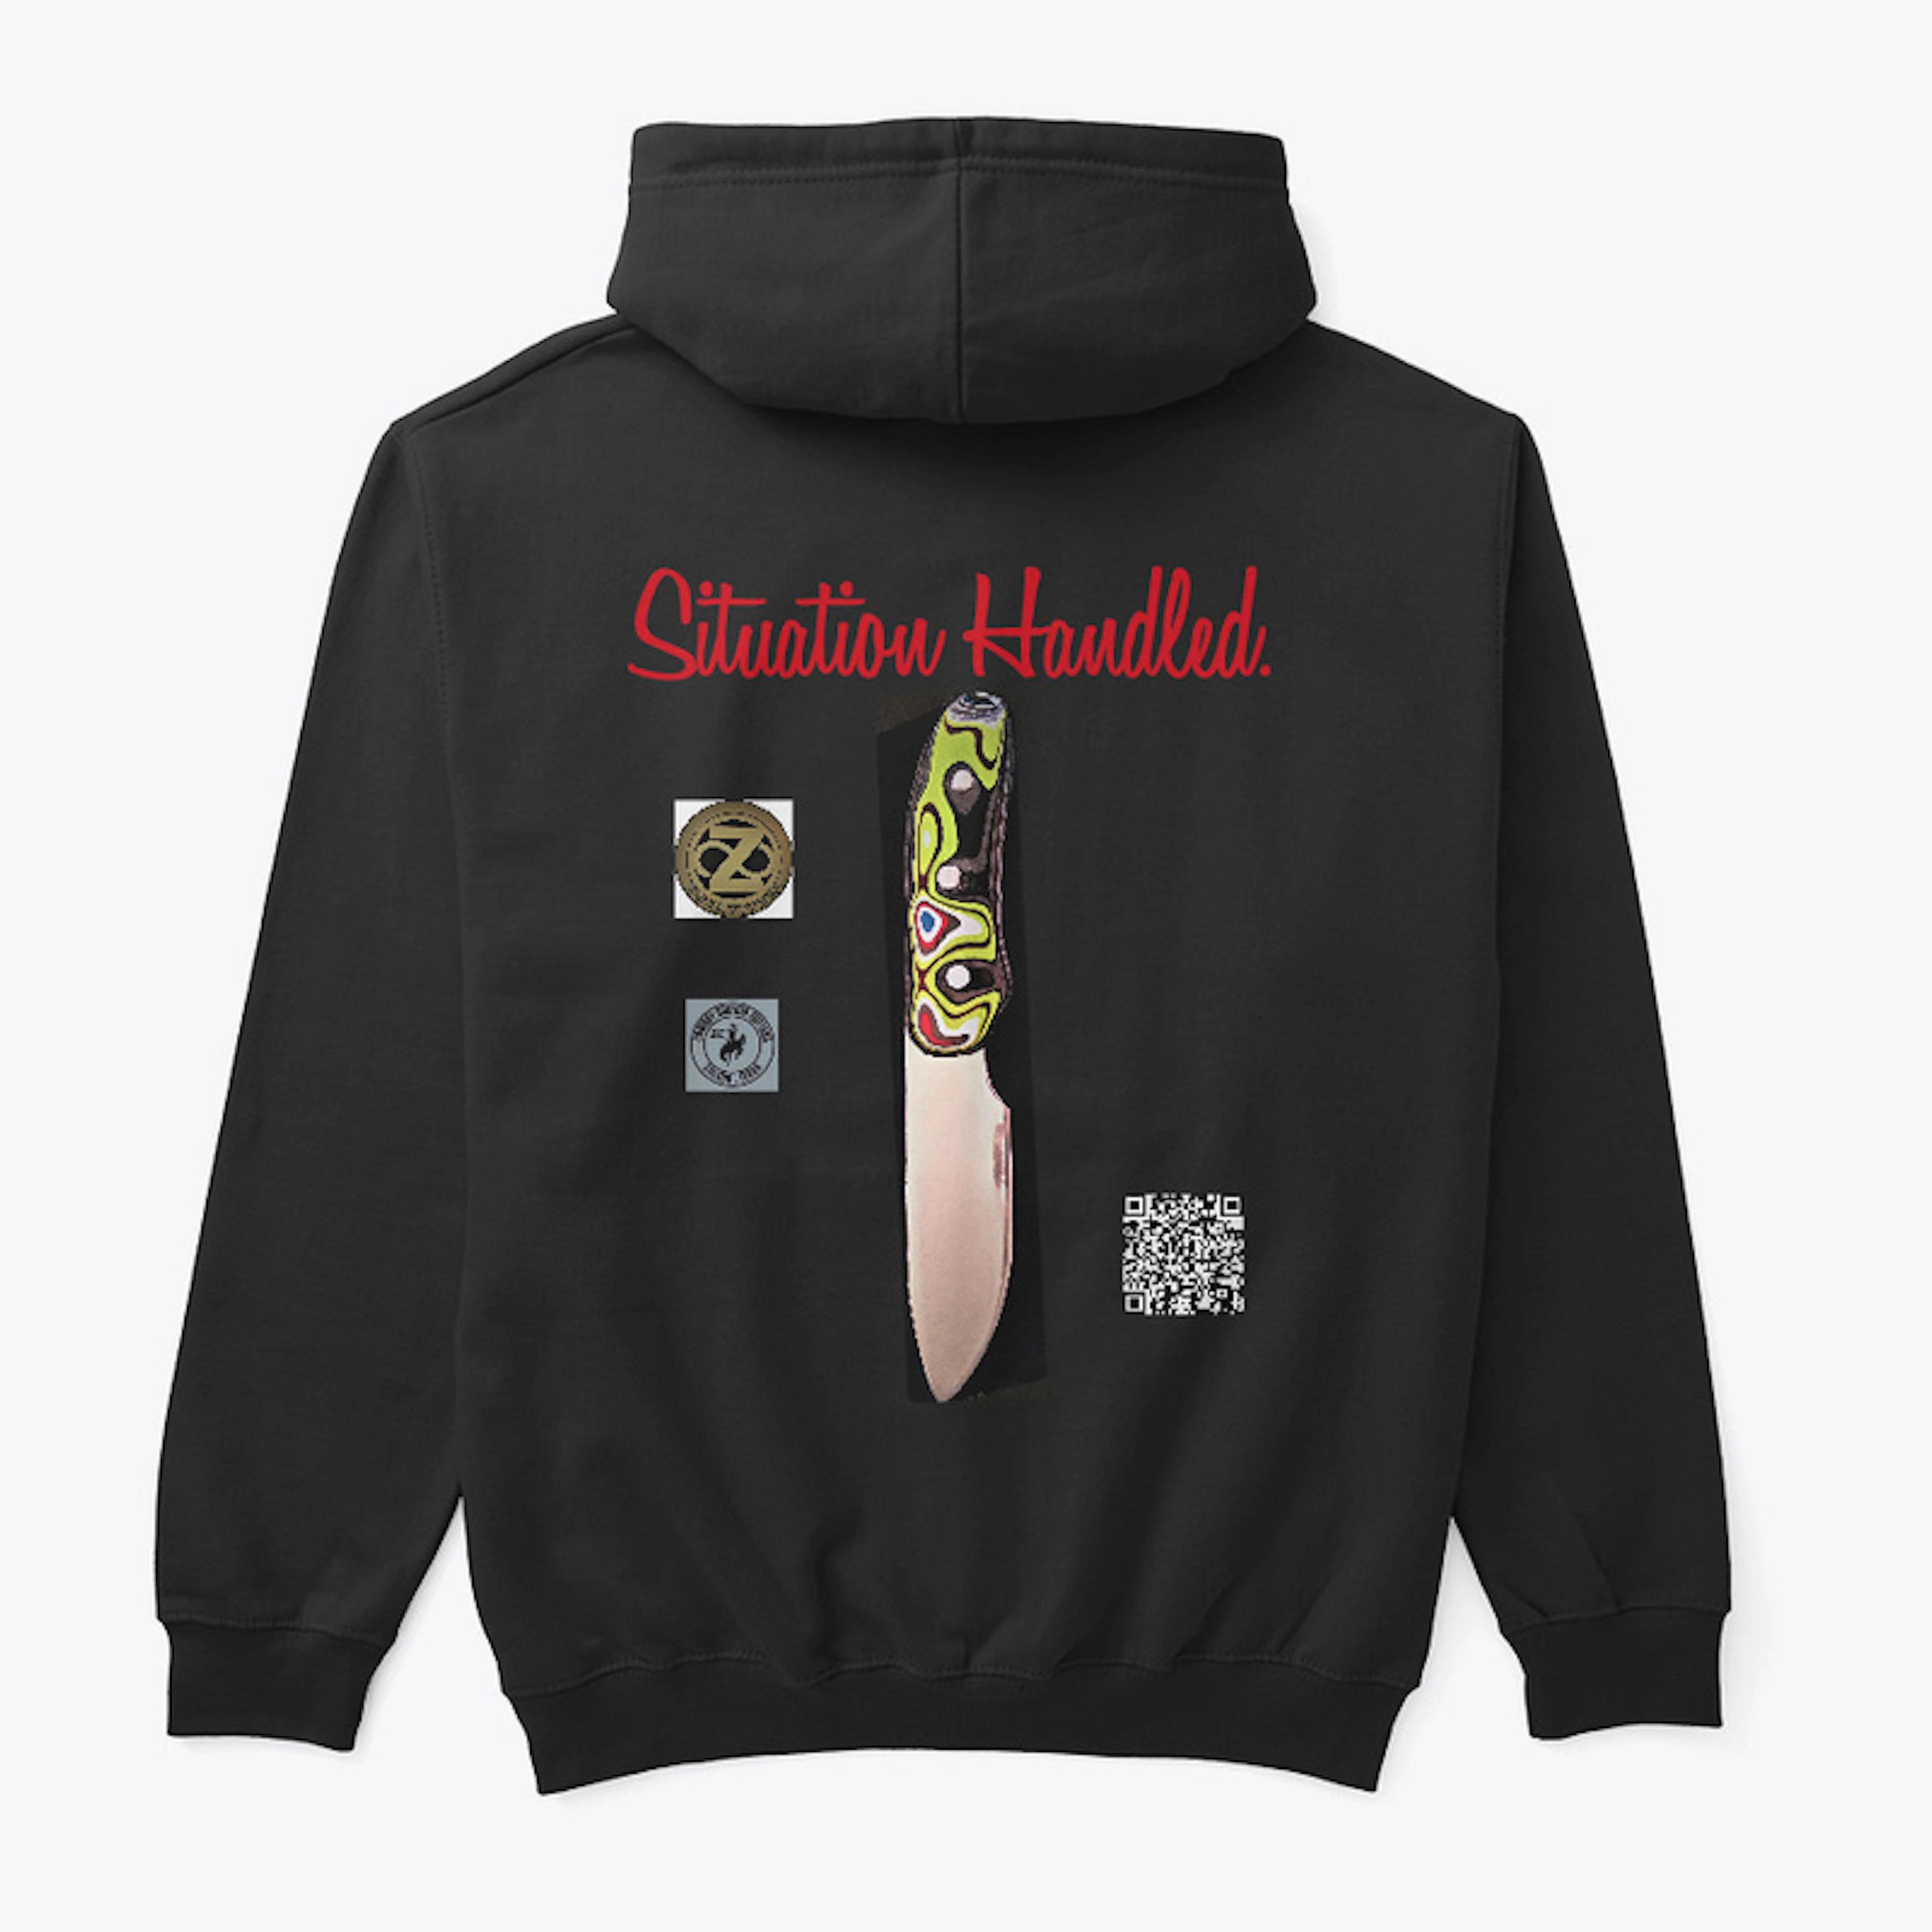 "Situation Handled" Gear